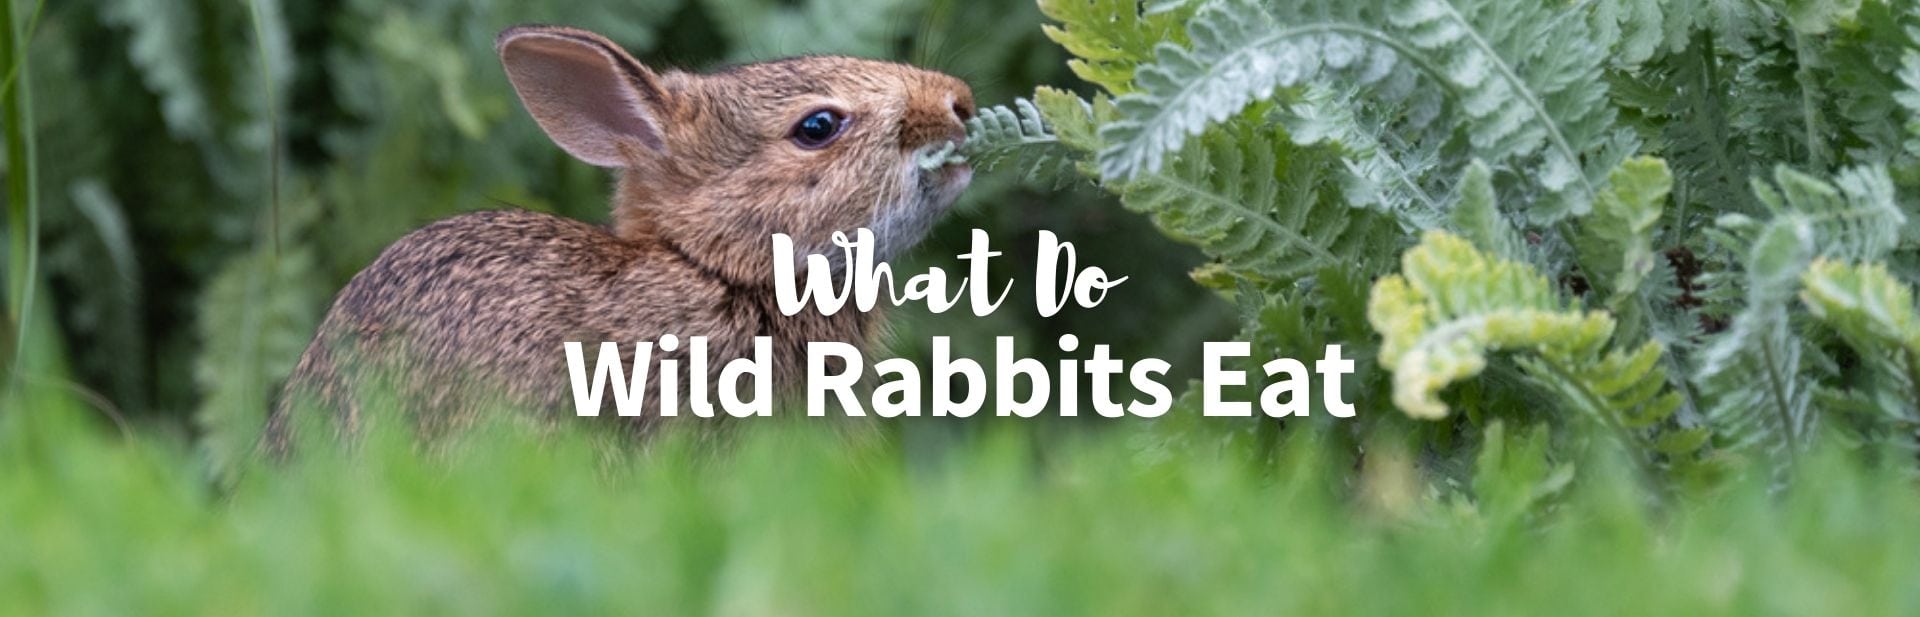 What Do Wild Rabbits Eat? A Diet of the Obvious and the Odd